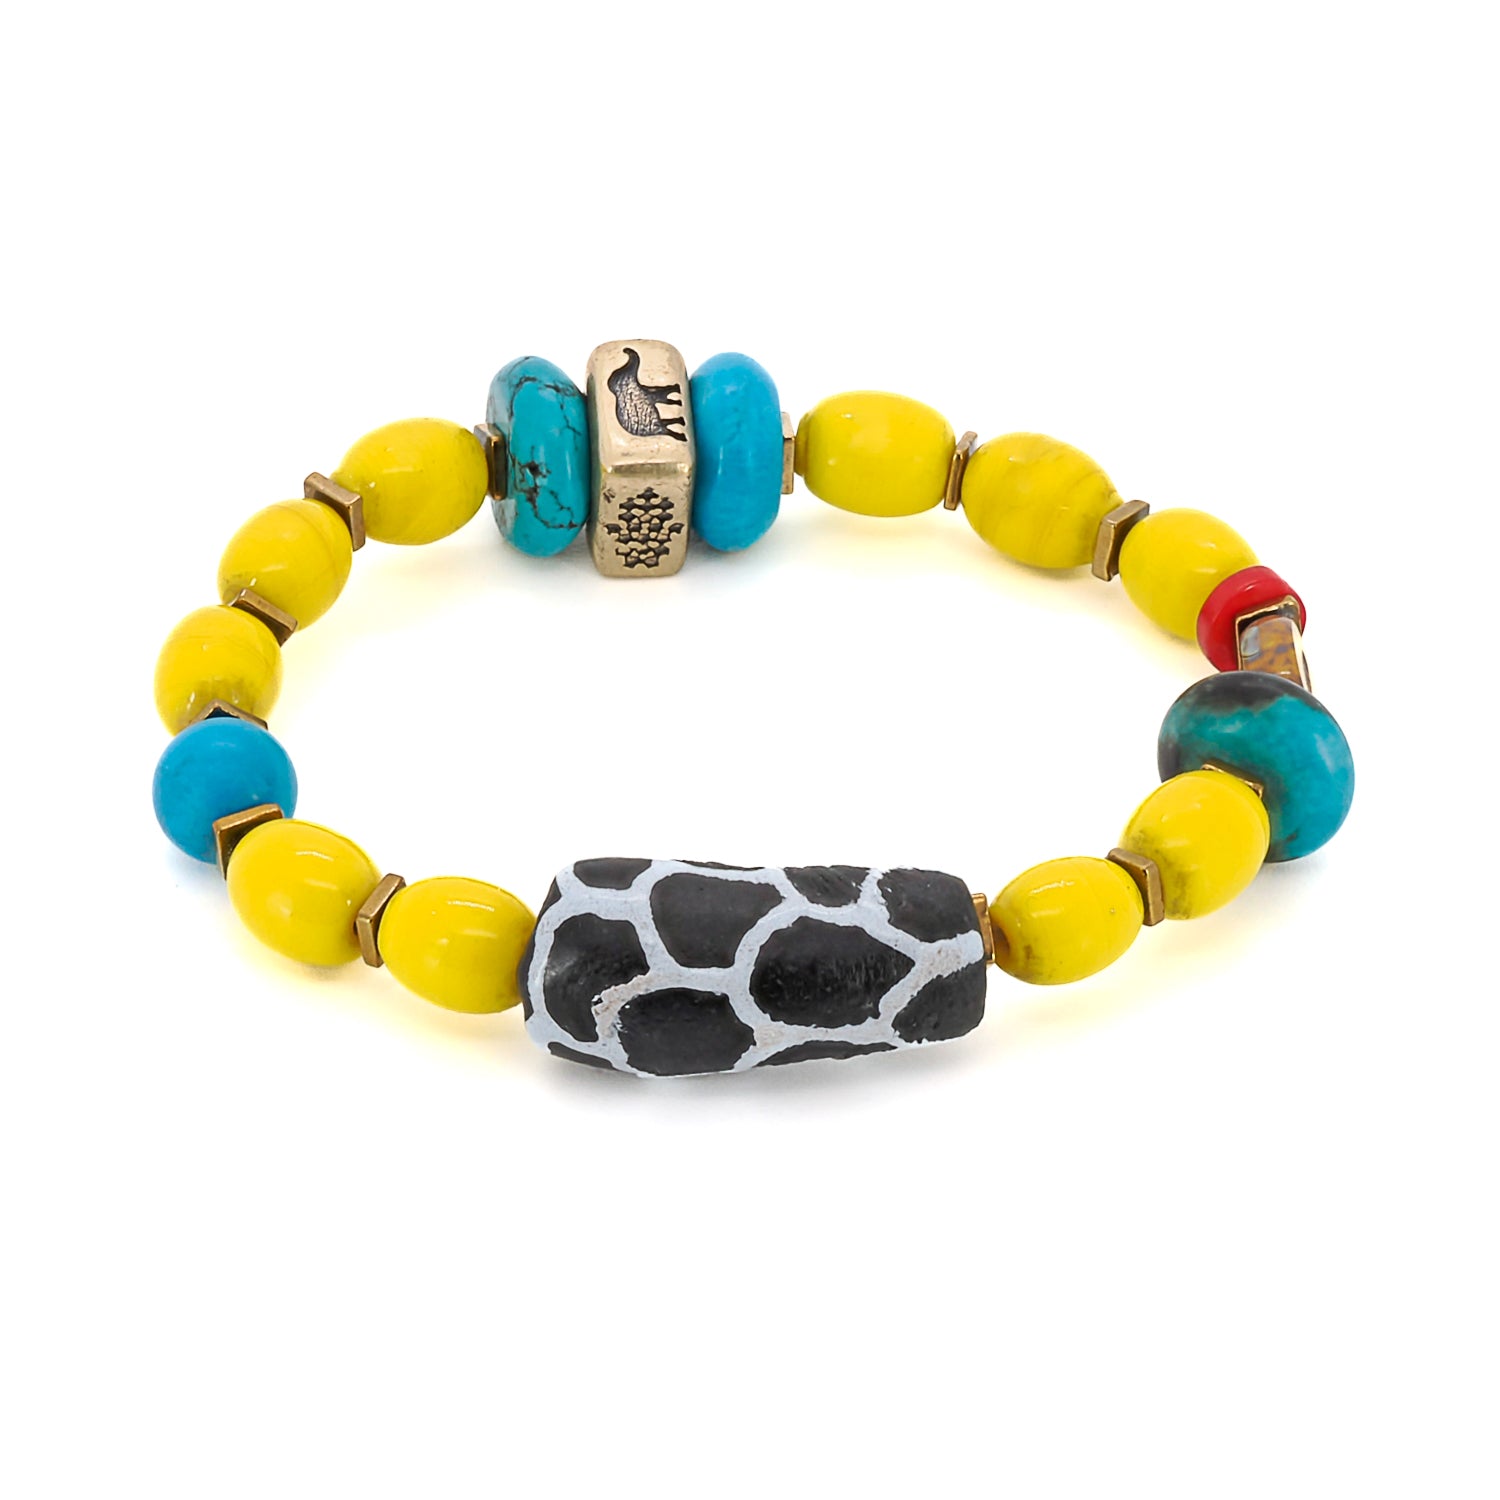 Close-up of the Happiness Symbol Yellow Bracelet, showcasing the vibrant yellow African color beads, the refreshing turquoise stone beads, and the intricate details of the bronze symbol beads, including the elephant, evil eye, and Hamsa.